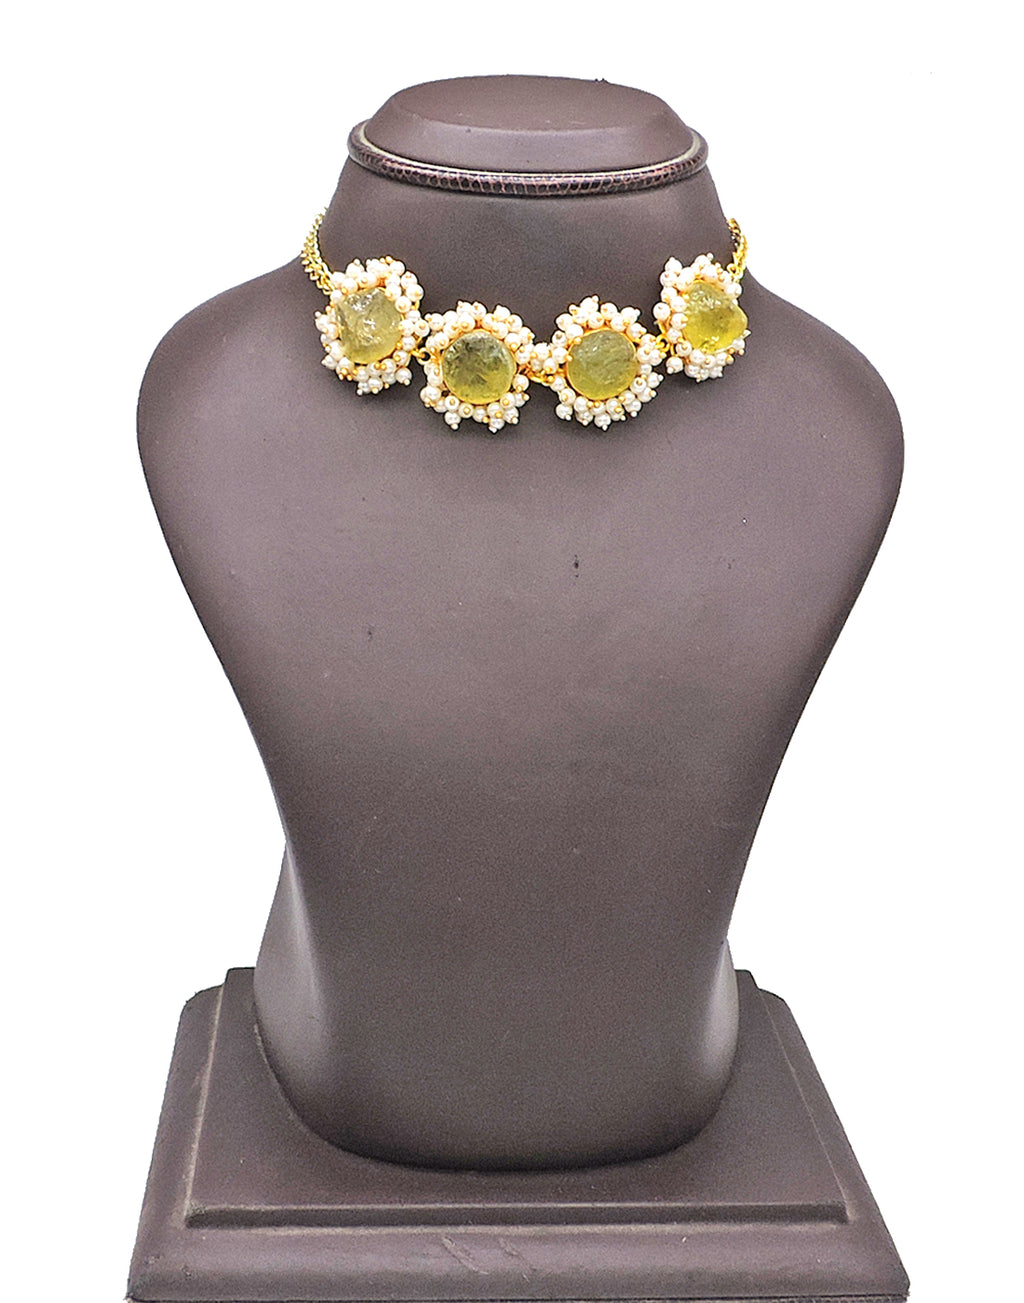 Citrine Bloom Necklace - Statement Necklaces - Gold-Plated & Hypoallergenic Jewellery - Made in India - Dubai Jewellery - Dori